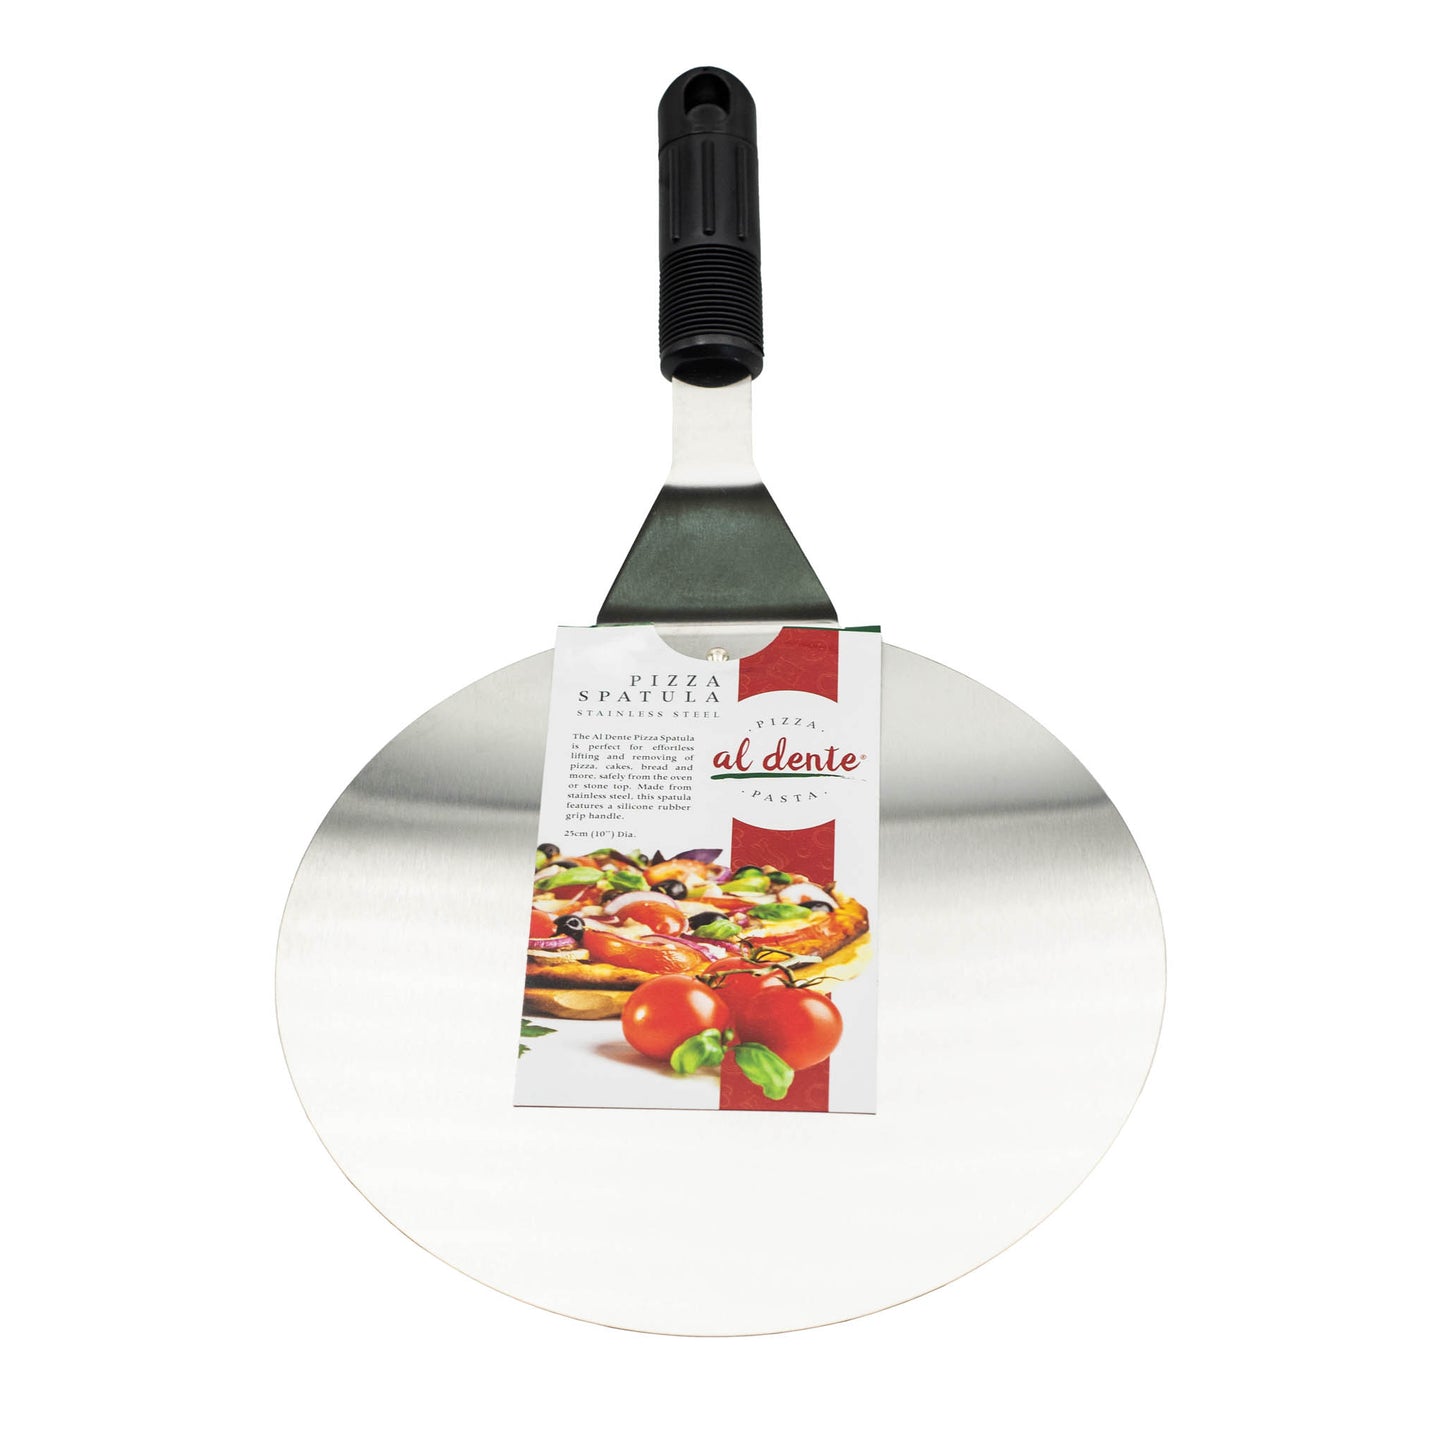 23cm diameter stainless steel pizza spatula or lifter. 